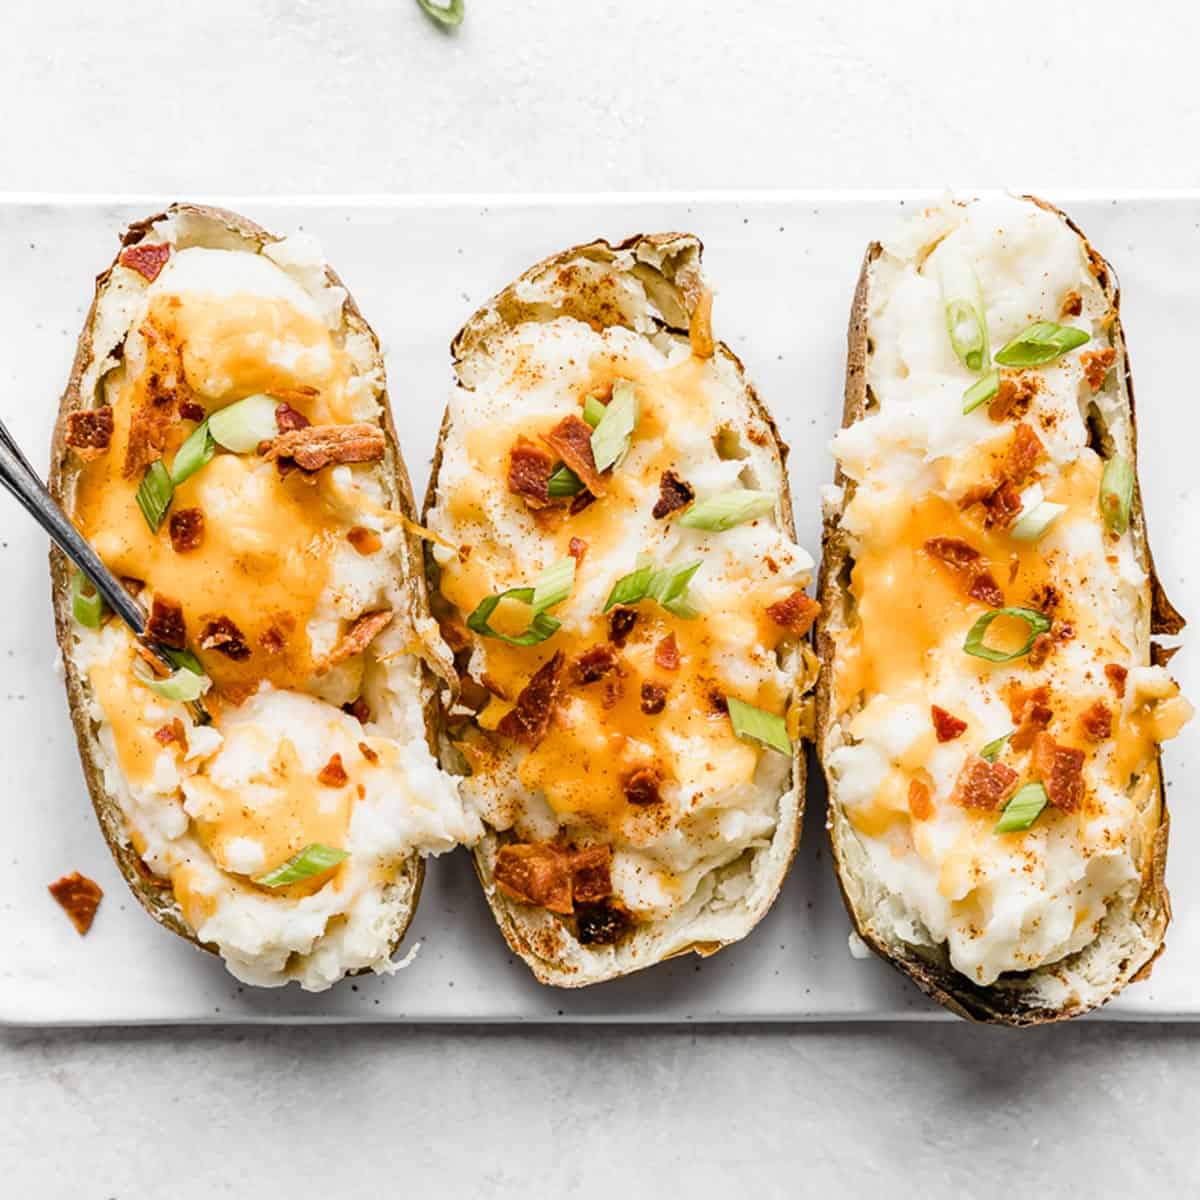 https://saltandbaker.com/wp-content/uploads/2021/11/twice-baked-potatoes-with-cream-cheese-featured.jpg